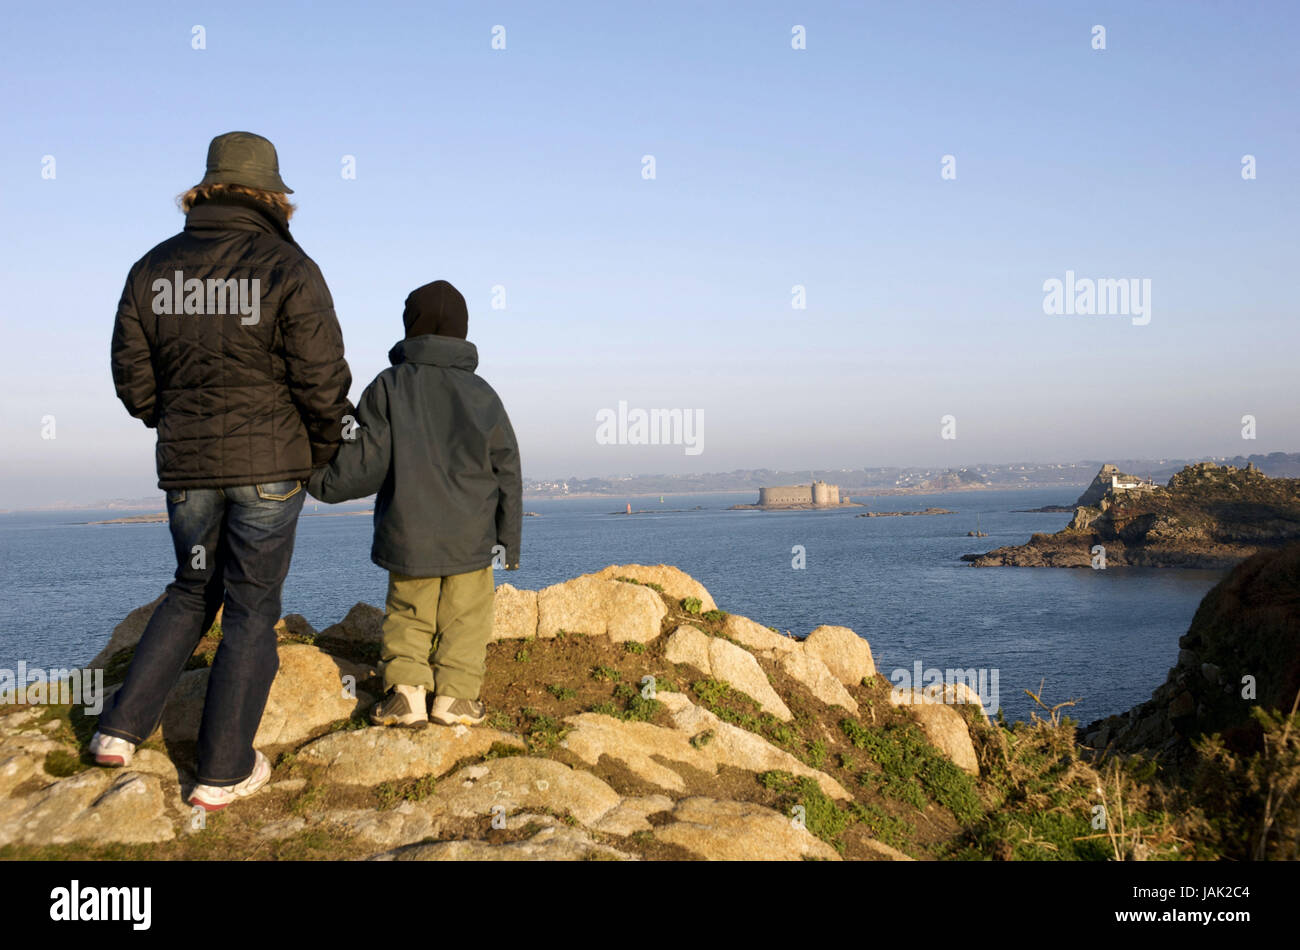 Europe,France,Brittany,Finistere,Carantec,Ile Louet,mother and child look at the Chateau you Taureau, Stock Photo